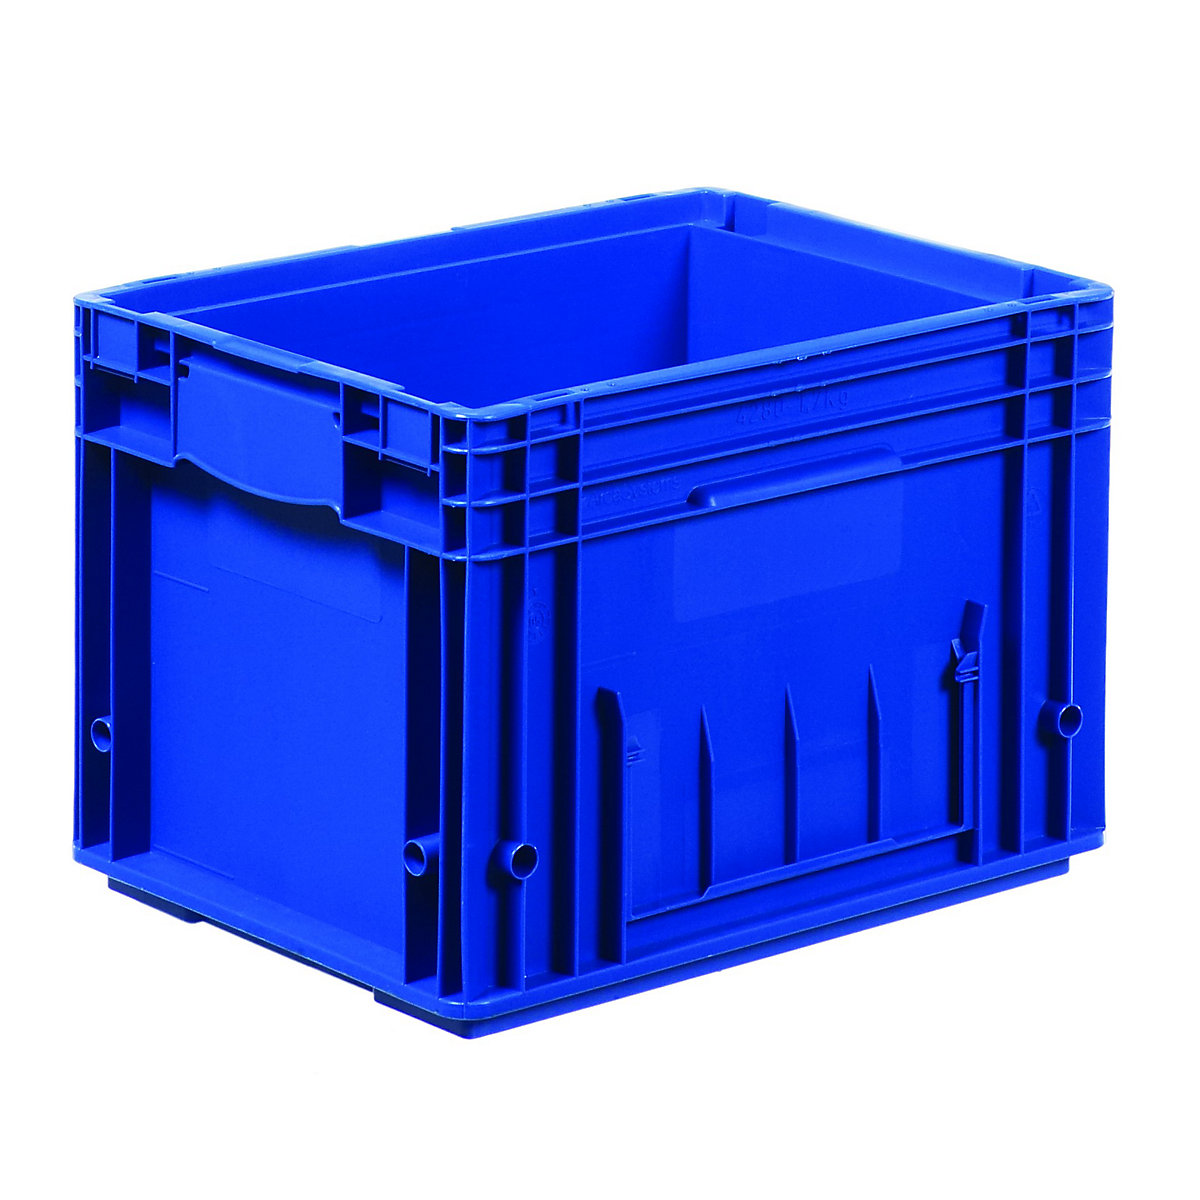 R-KLT container made of PP, blue, capacity 24.1 l, LxW 396 x 297 mm-4